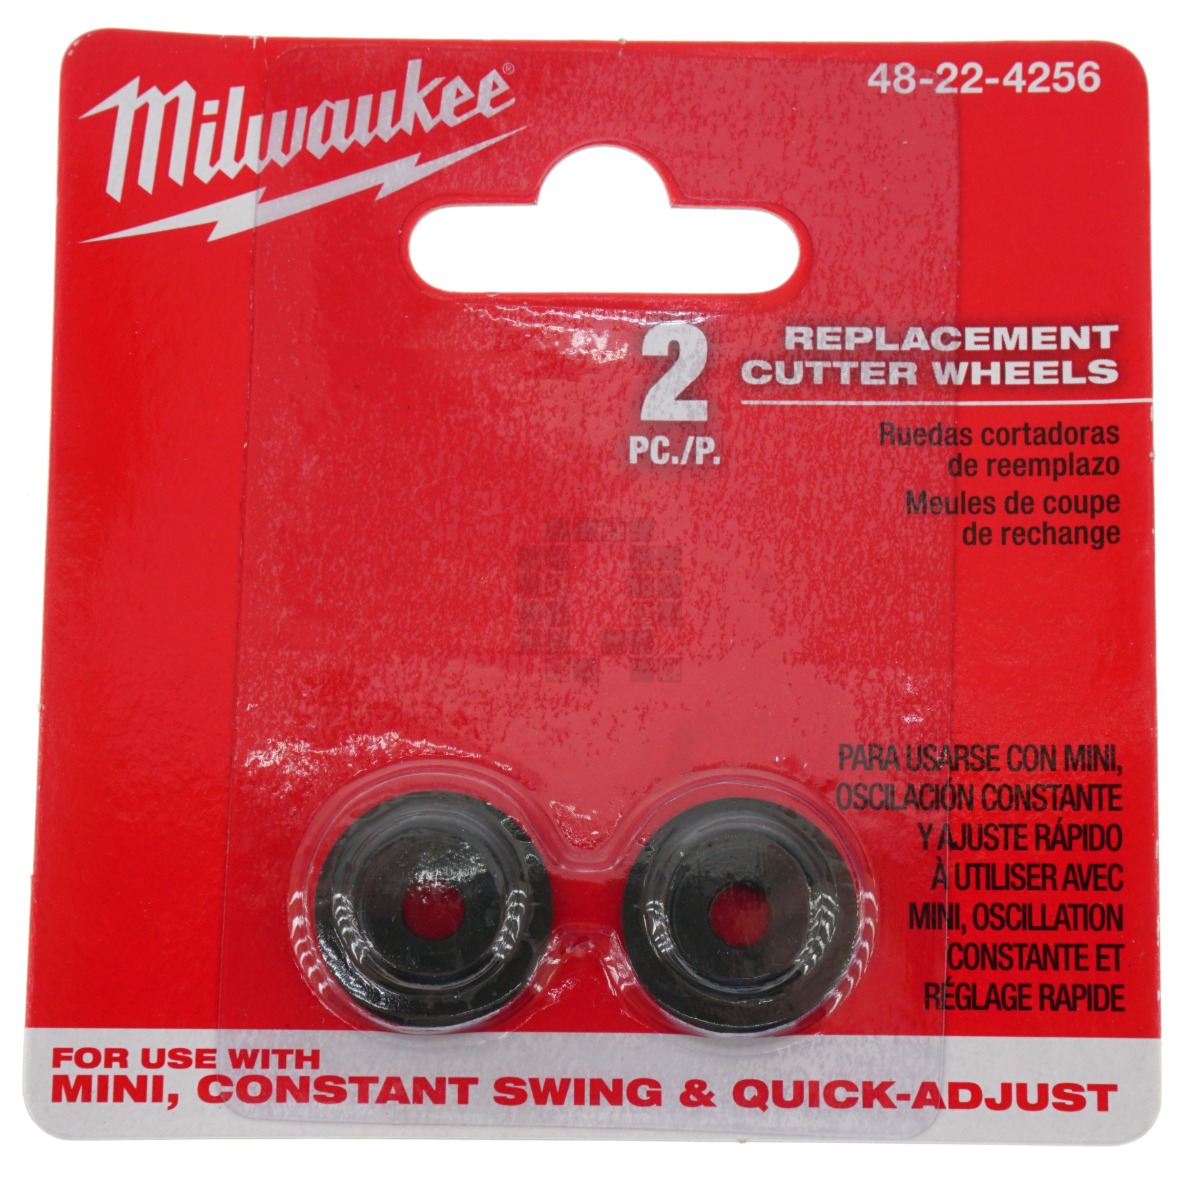 Milwaukee 48-22-4256 Replacement Cutter Wheels, 2 Pack